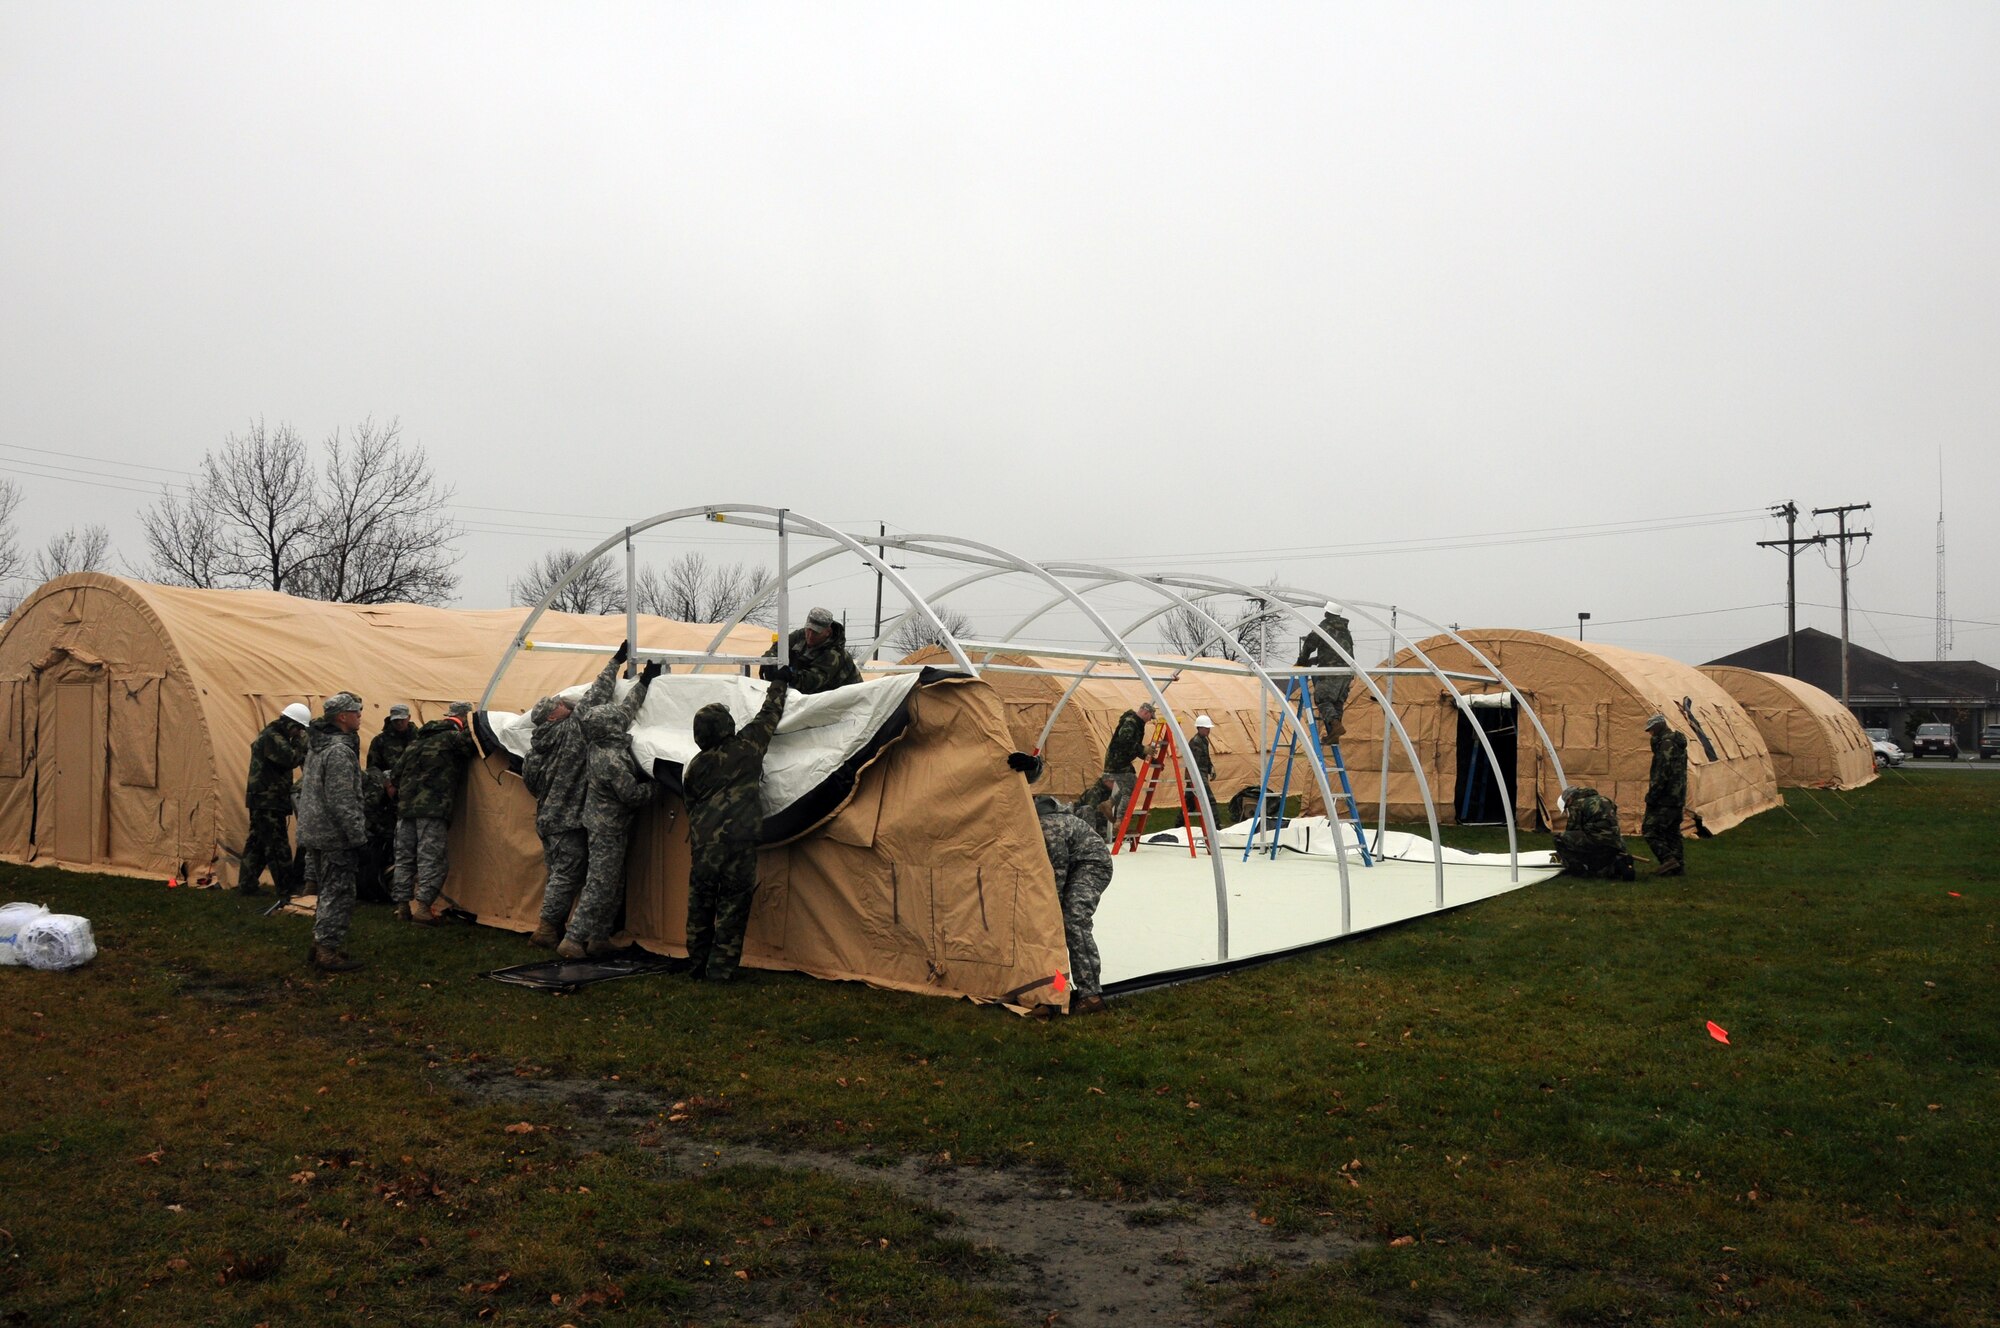 Niagara ramps up for Vigilant Guard. Civil engineers from the 107th Airlift Wing, work together with members from A Company 642nd, Army National Guard to construct a tent city. The work crew will erect 32 Rapid Deployment System shelters that will house up to 300 military responders. The RDS are highly mobile systems designed to be self contained temporary housing.  Each RDS comes complete with all necessary equipment to safely set up each shelter in a matter of a few hours. USAF Photo/Staff Sgt. Peter Dean.